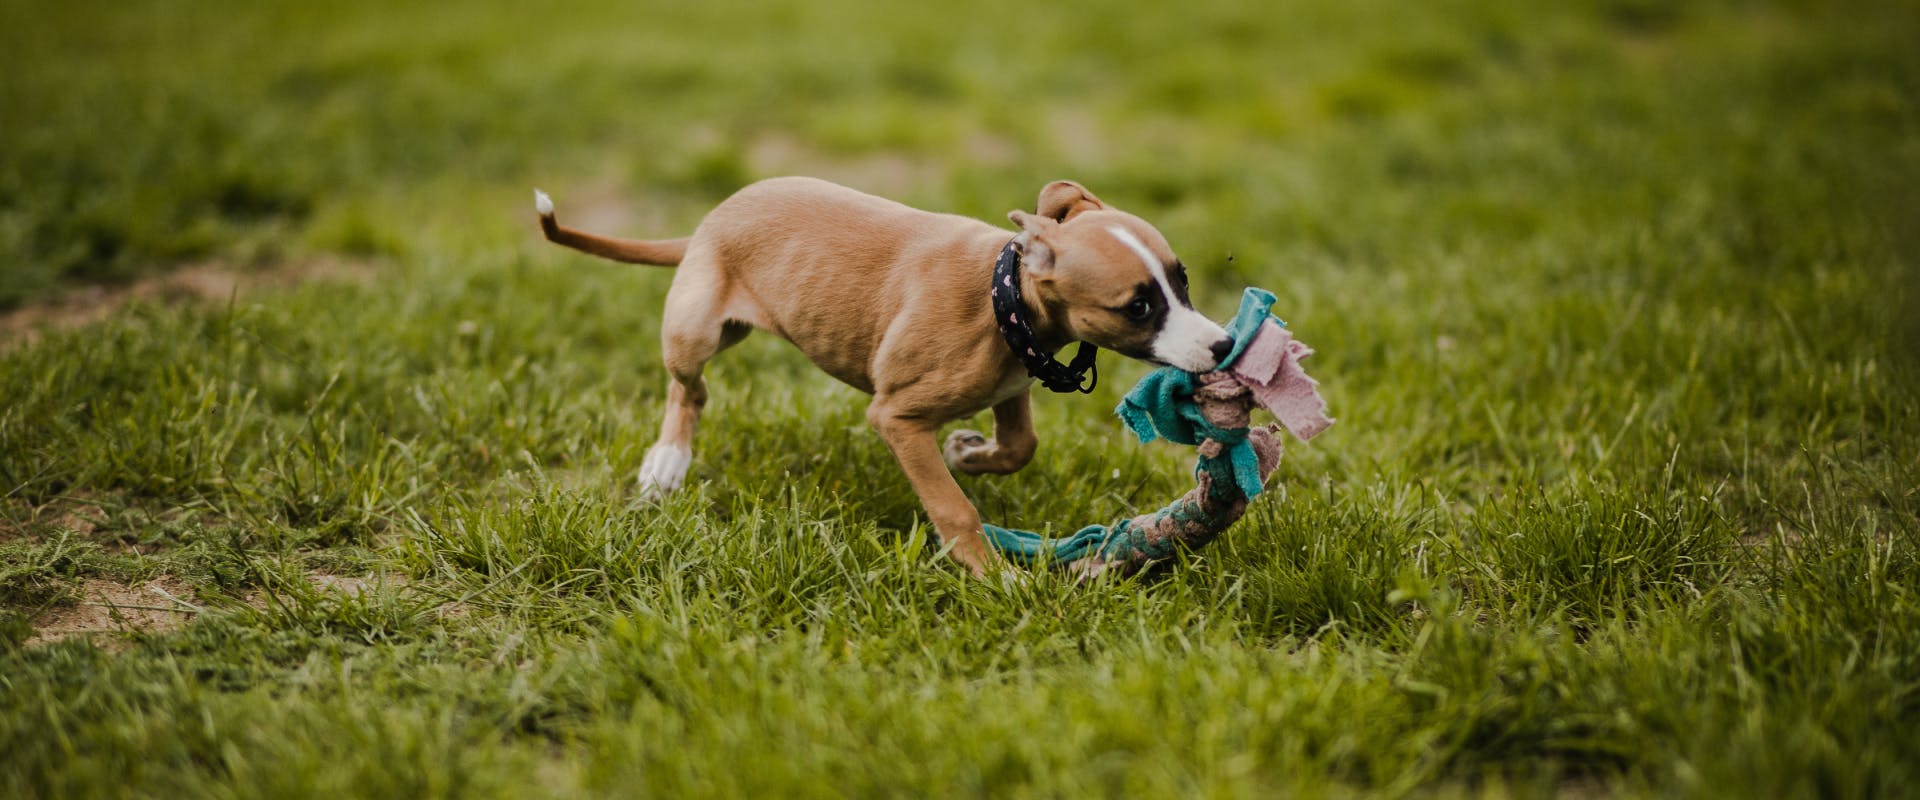 A puppy plays with a DIY braided fabric toy. 